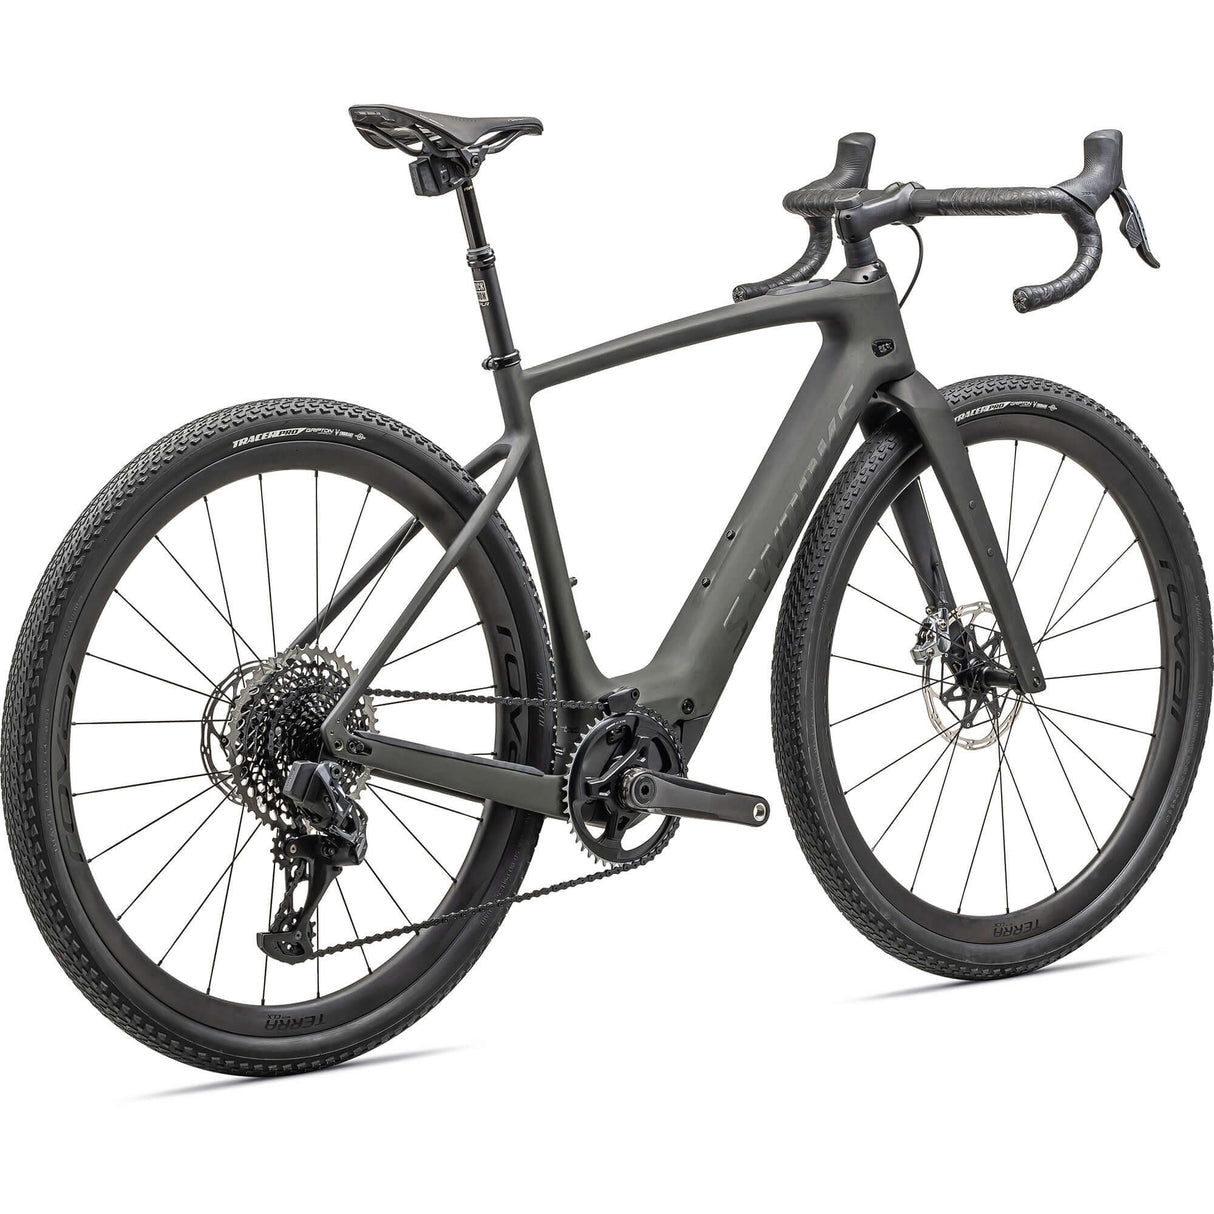 S-Works Creo 2 | Strictly Bicycles